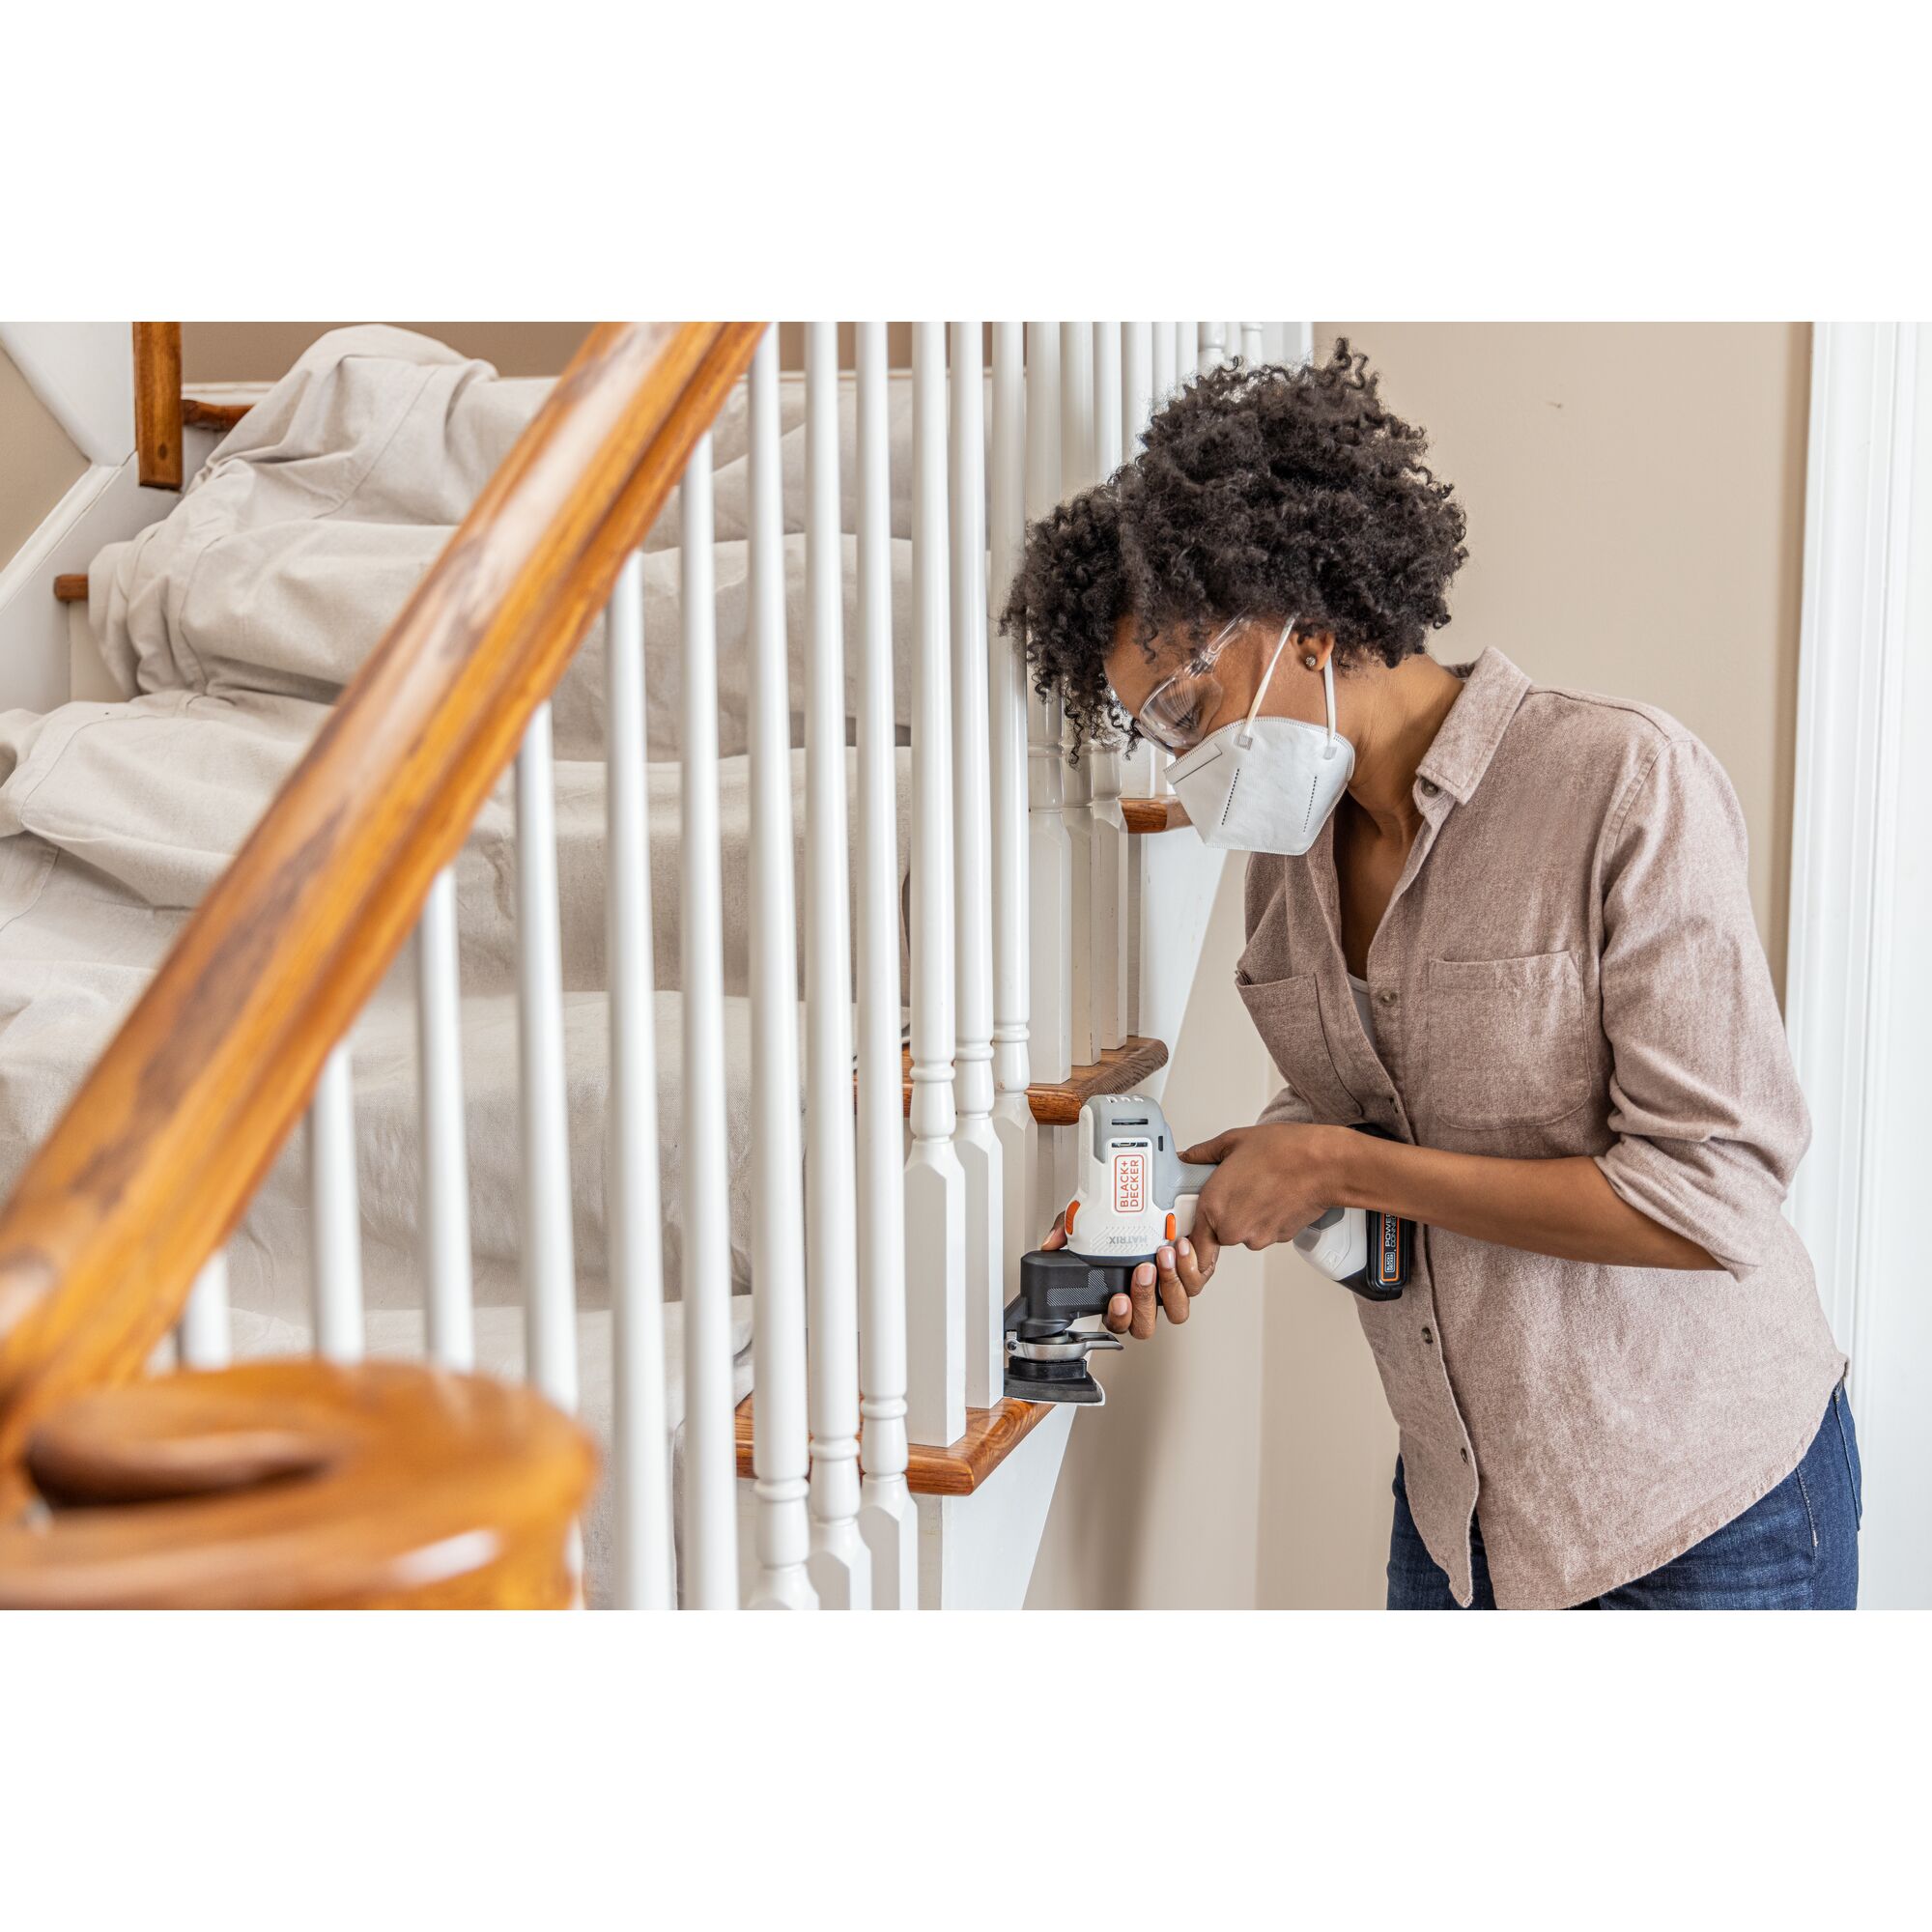 Person sands in between spindles on a staircase with the BLACK+DECKER MATRIX multi-tool attachment